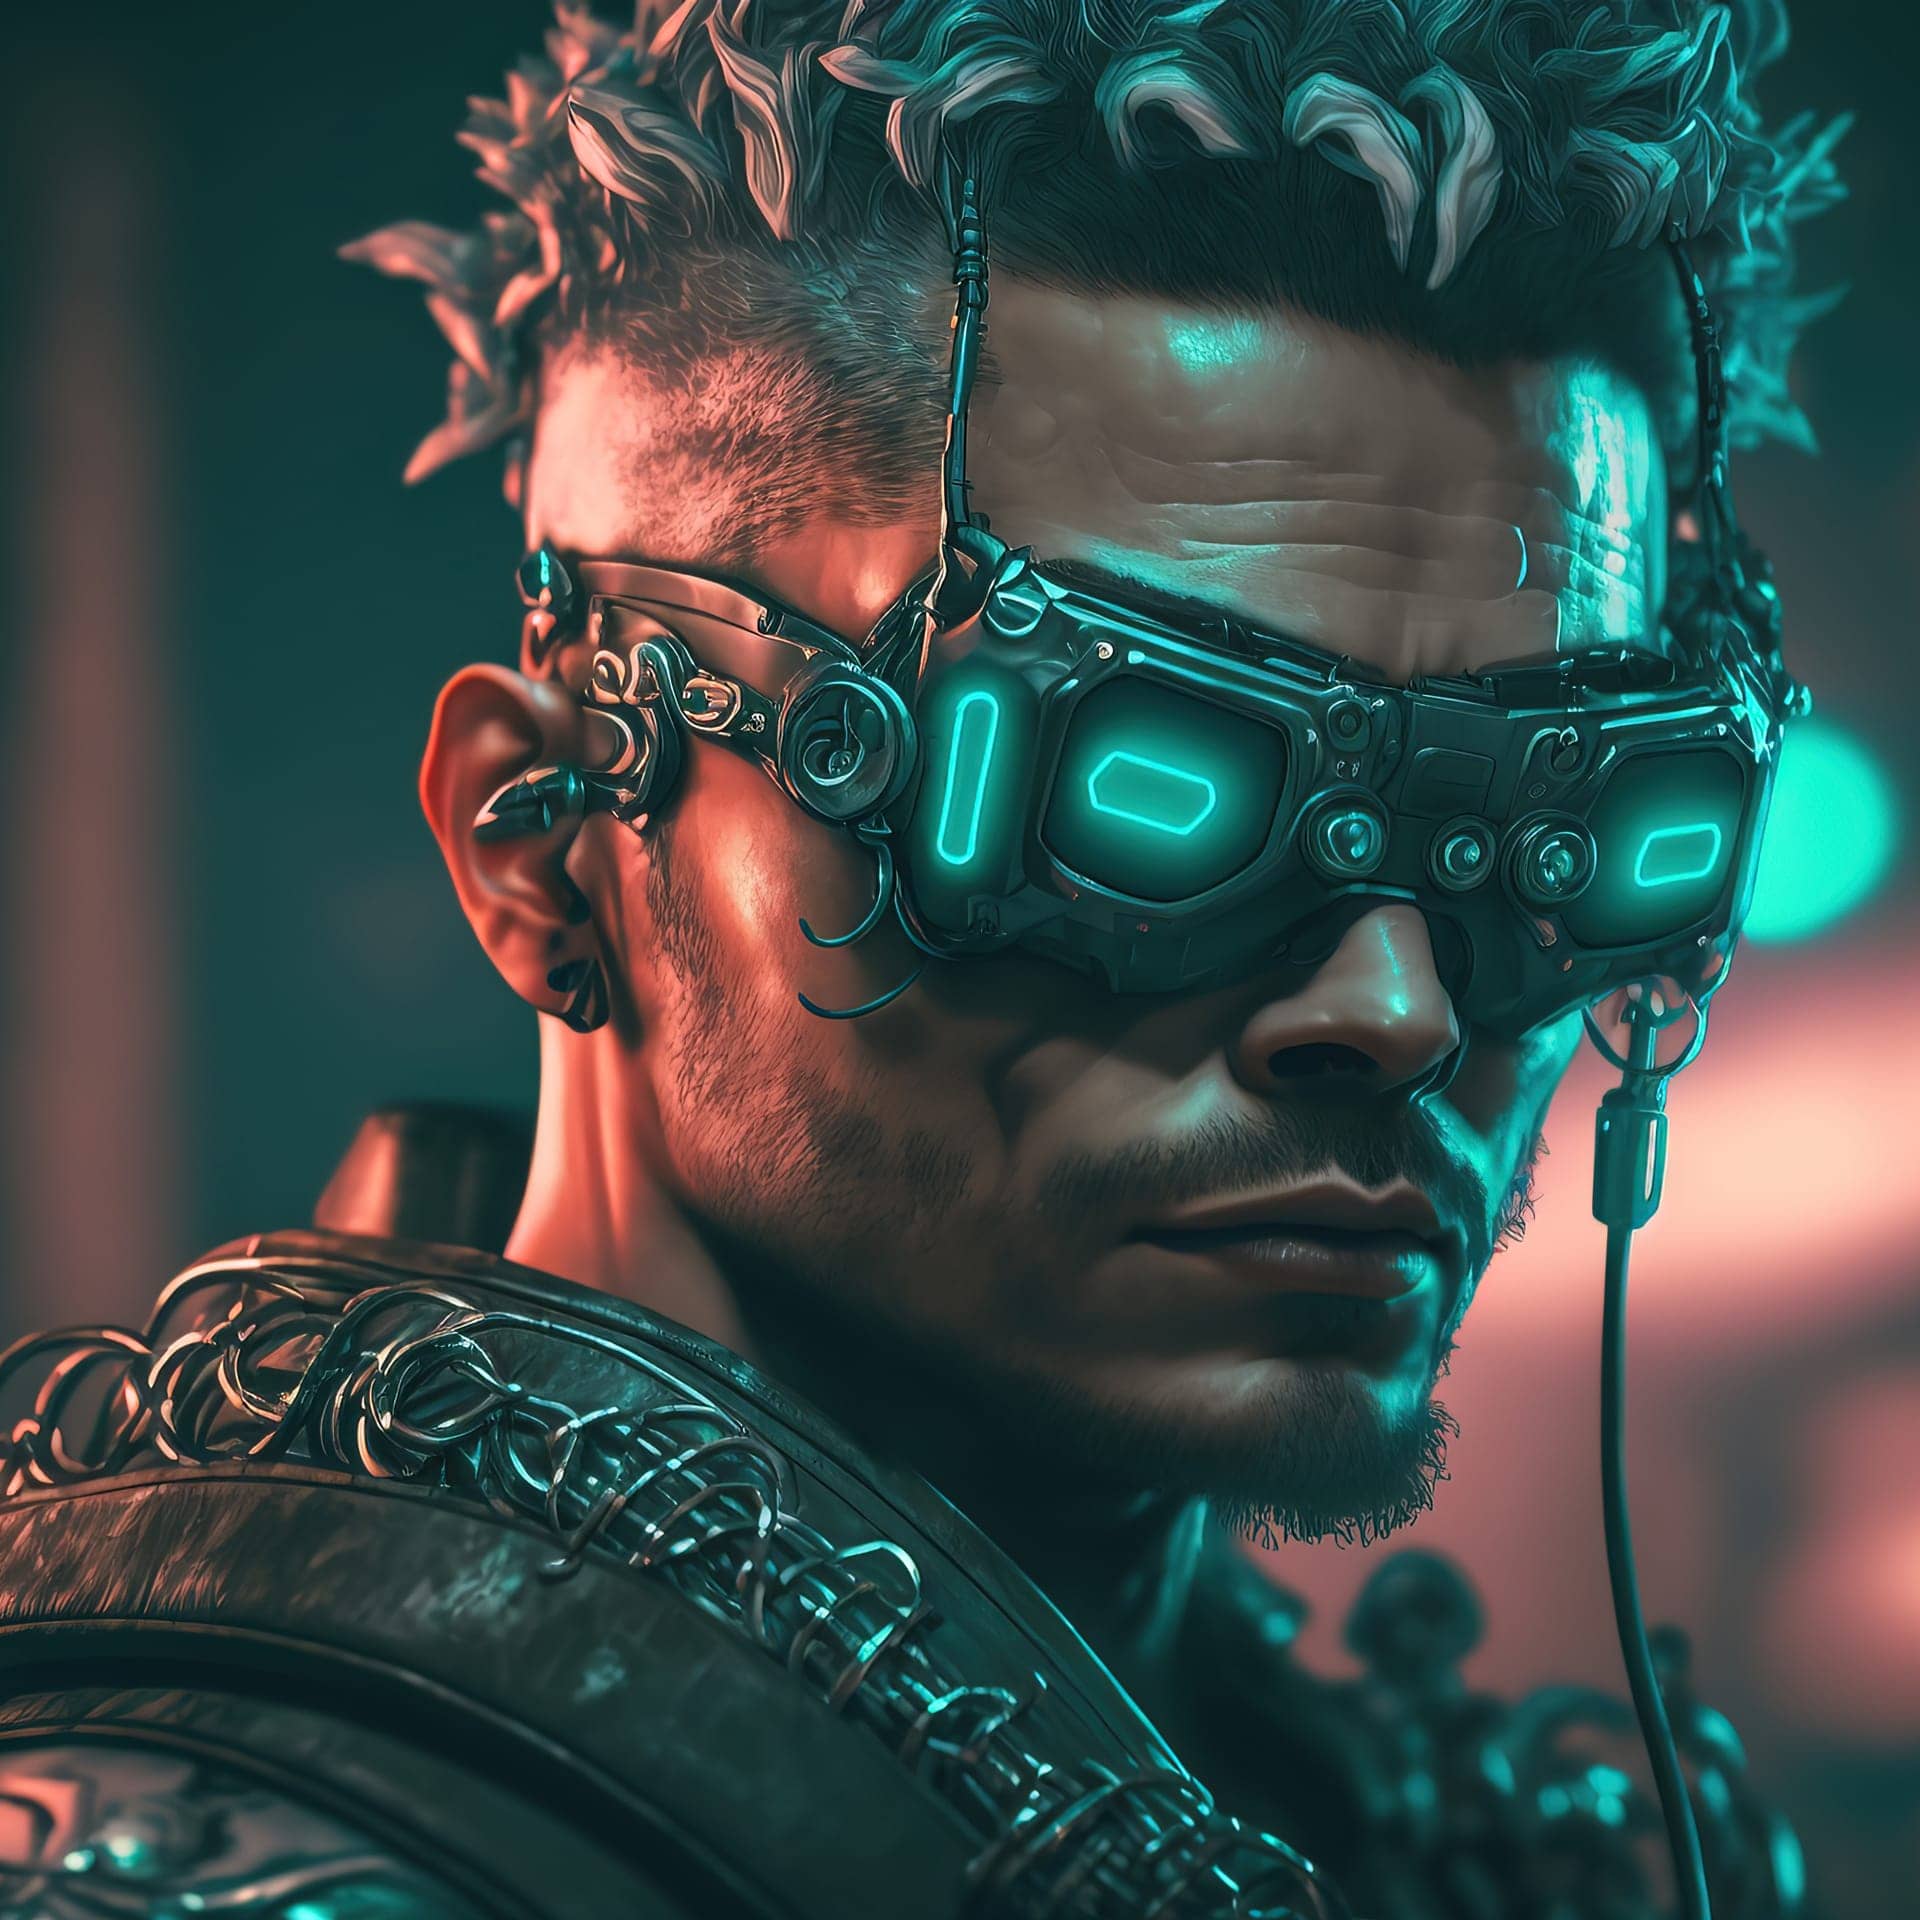 Cyberpunk space hunter with big gun army gear excellent image